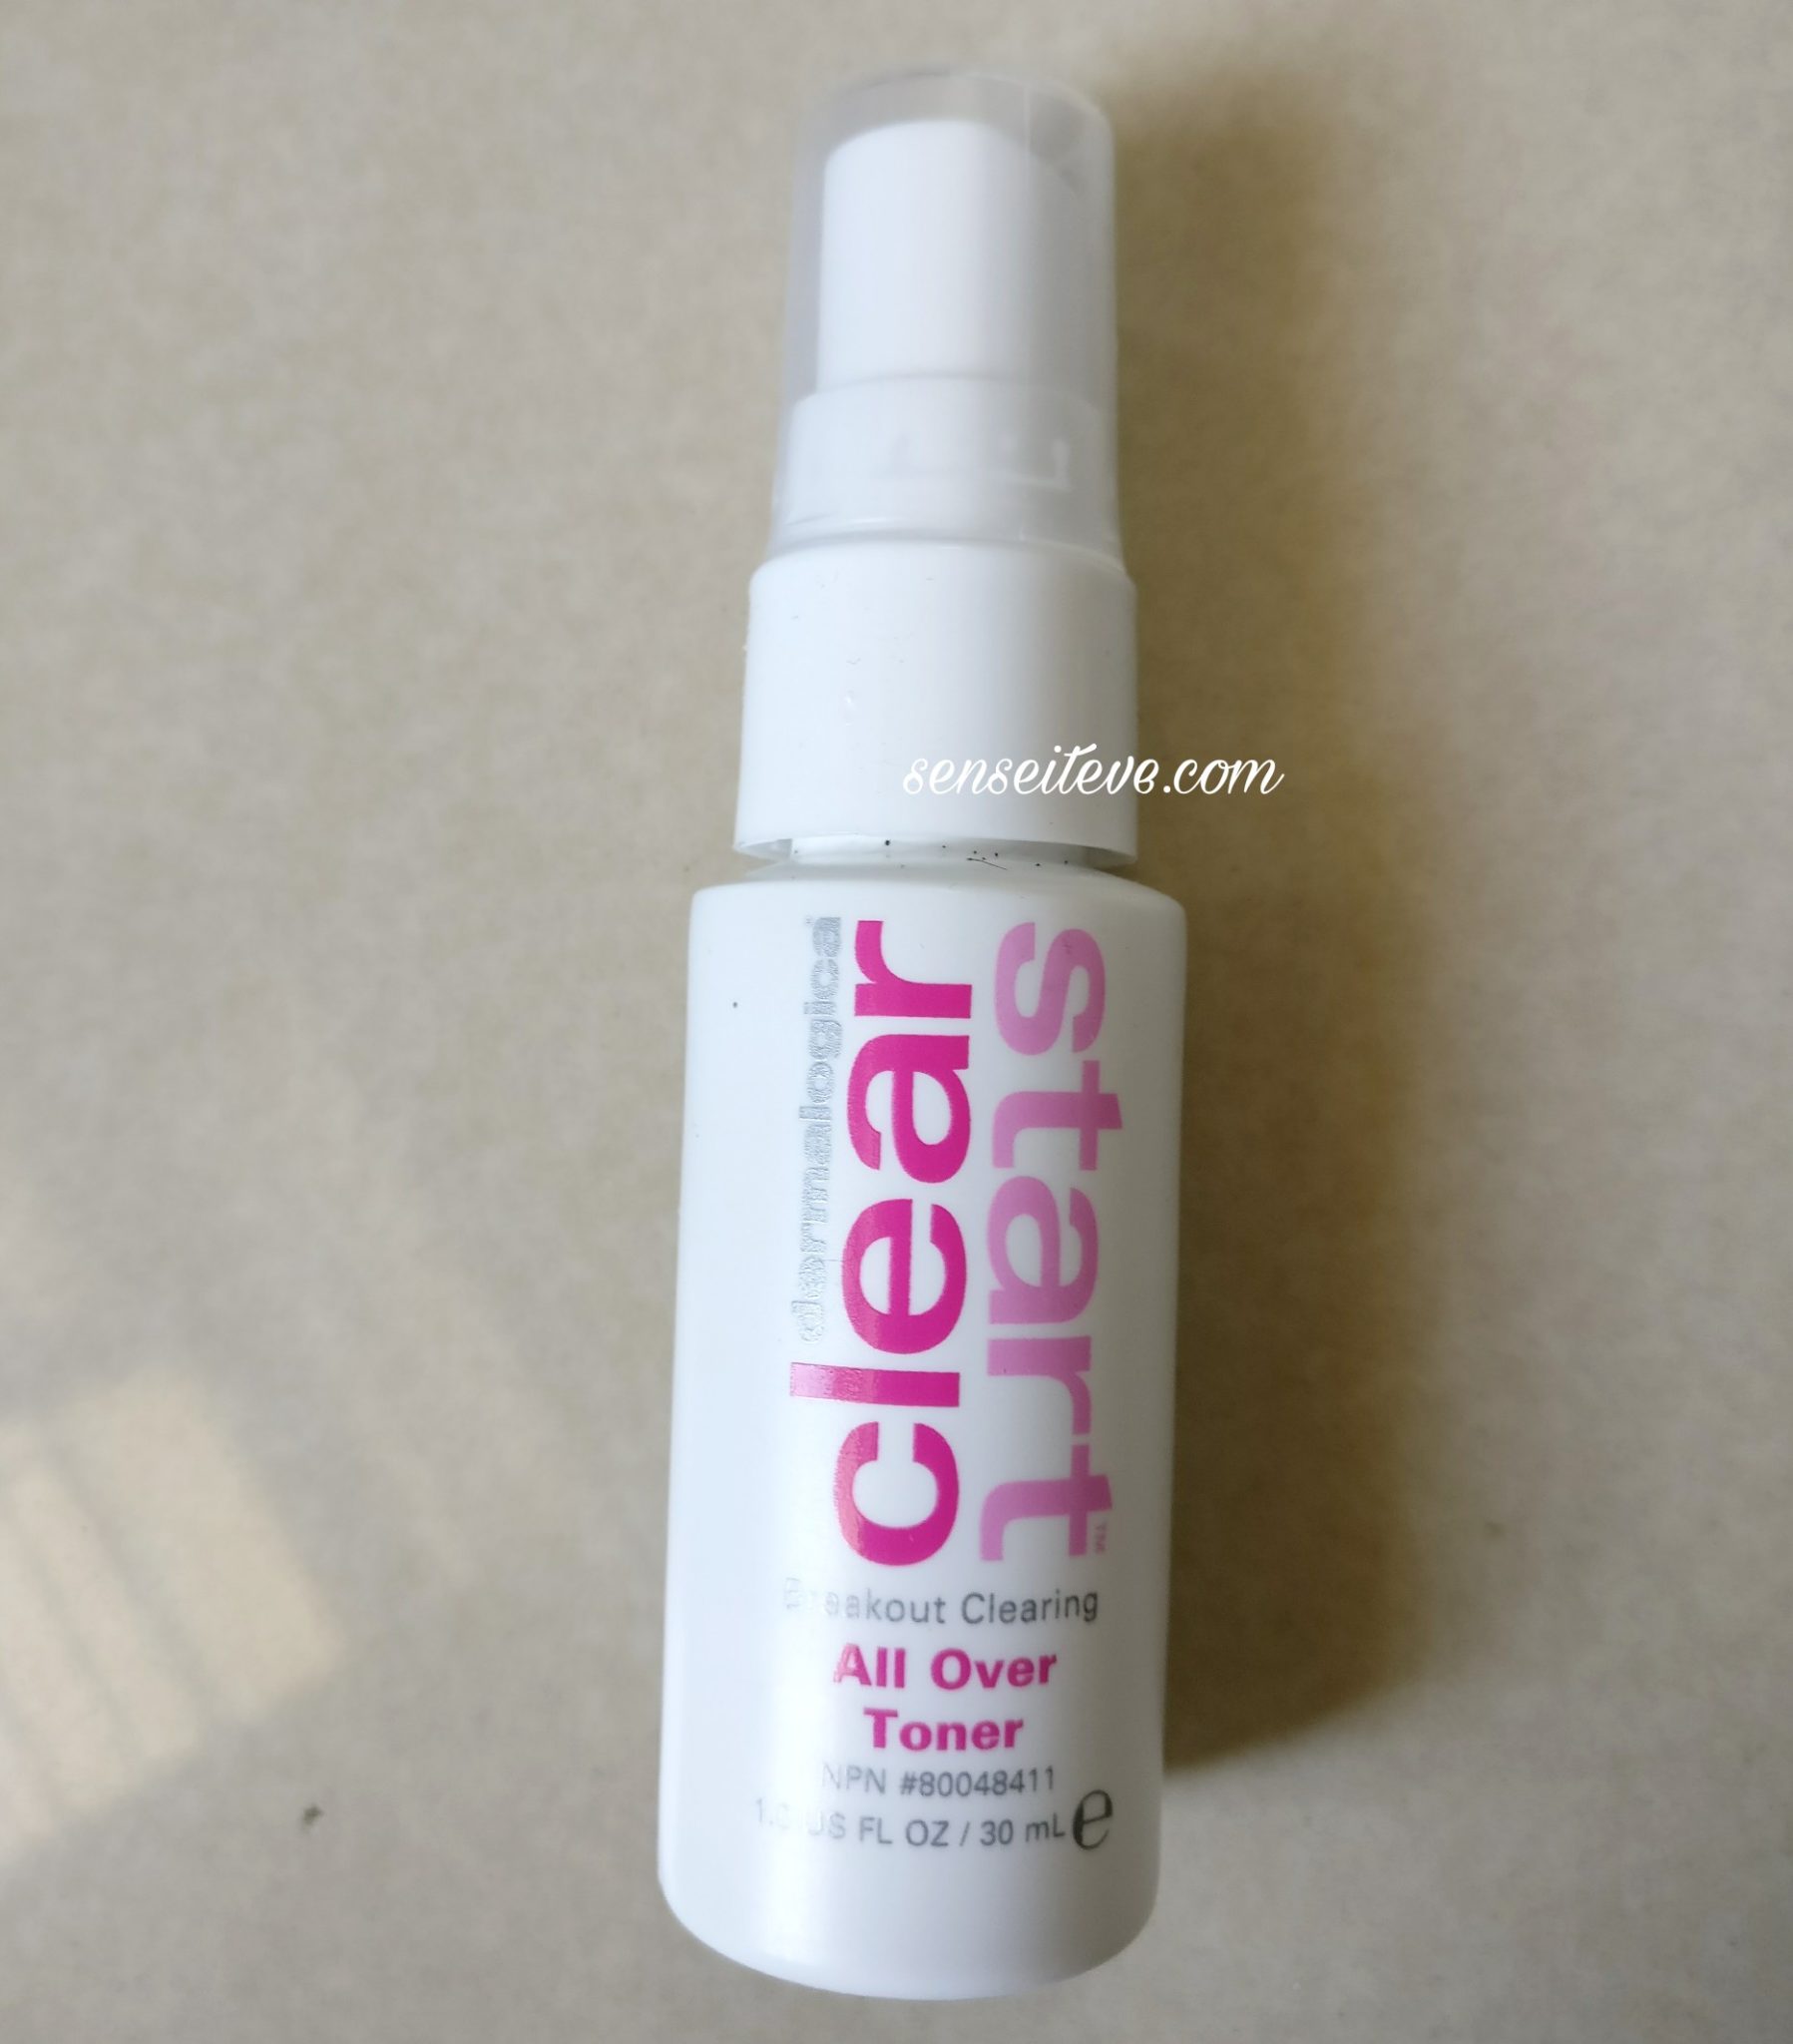 Dermalogica Clear Start Breakout Clearing All Over Toner Sense It Eve Dermalogica Clear Start Today, Clear Skin Tomorrow Kit Review